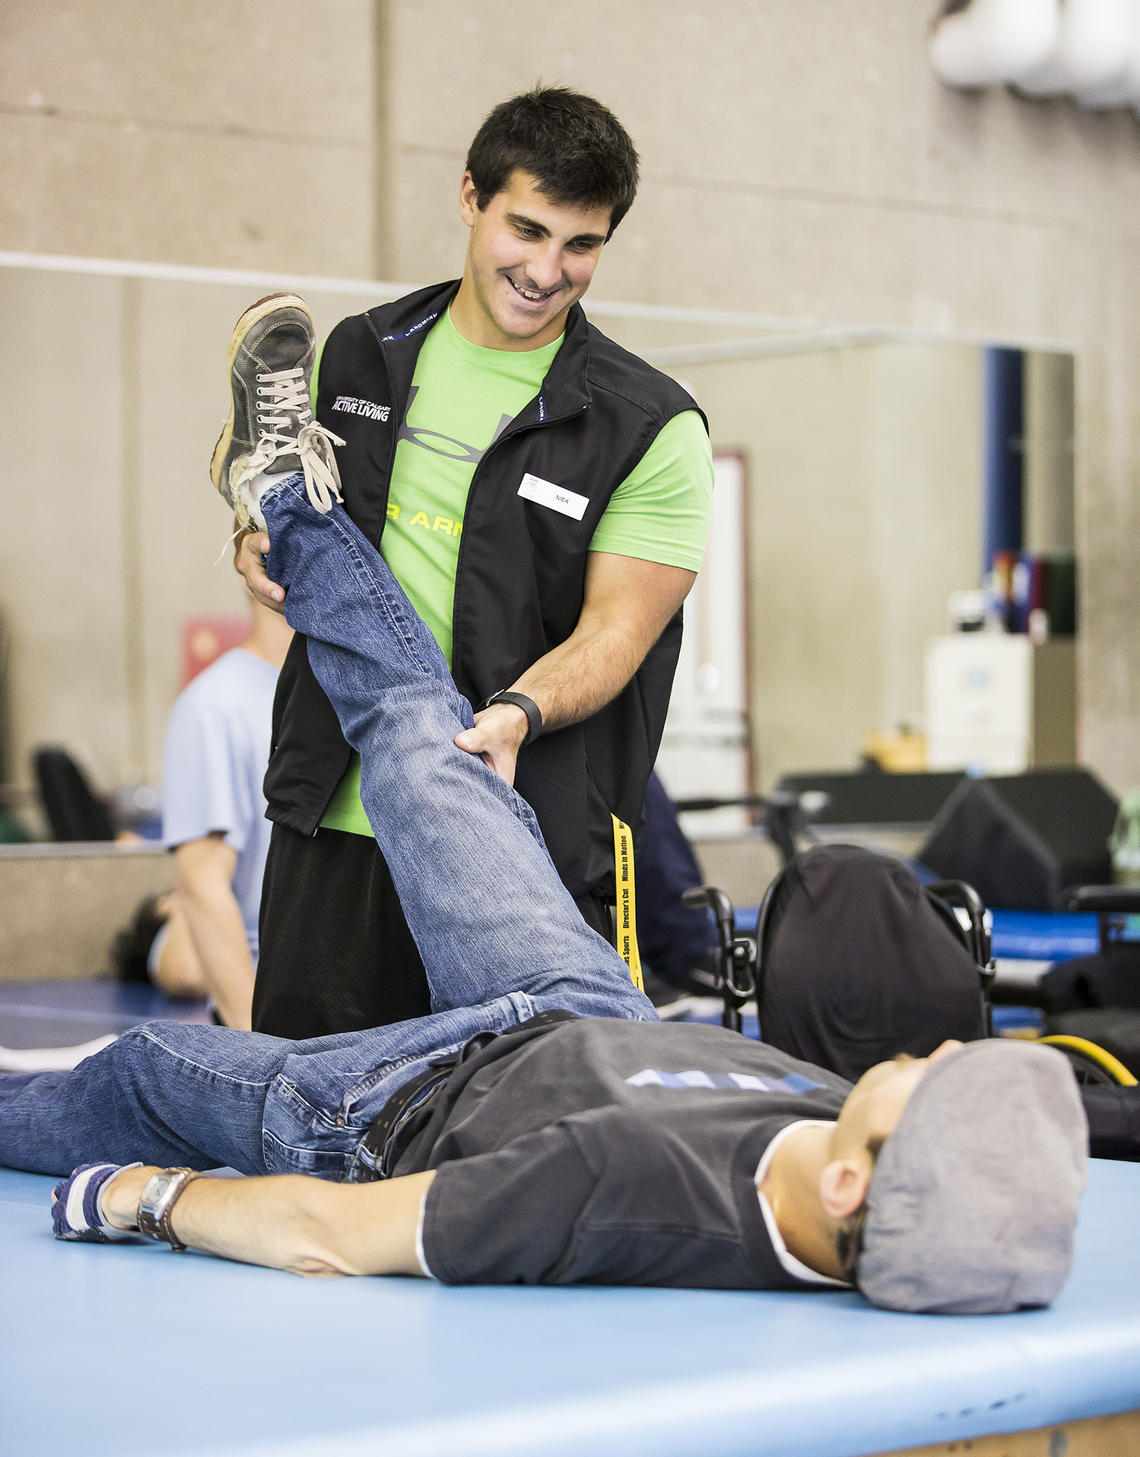 UCalgary Rehab fitness client has his mobility session with trainer